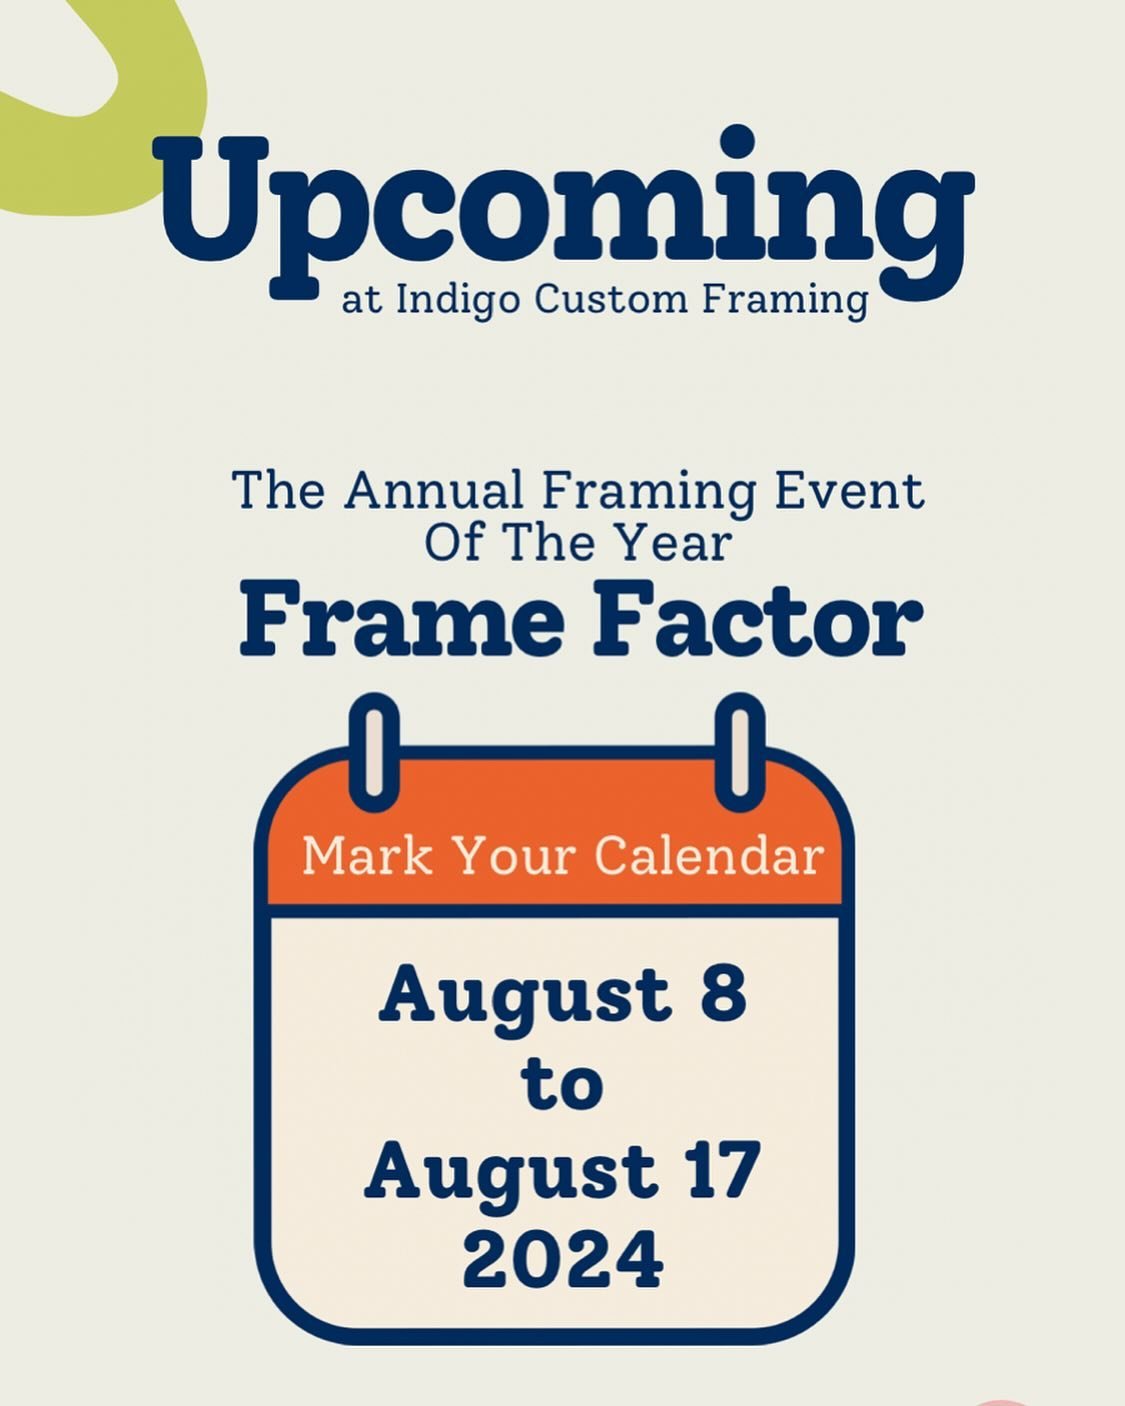 Frame Factor is one of our favorite promotions we do each year!
Bring up to two pieces (smaller than your hand, or about 6.5&rdquo;x6.5&rdquo; and no more then 1/2&rdquo; thick) to be framed for one low, flat rate with one catch - the framing will be